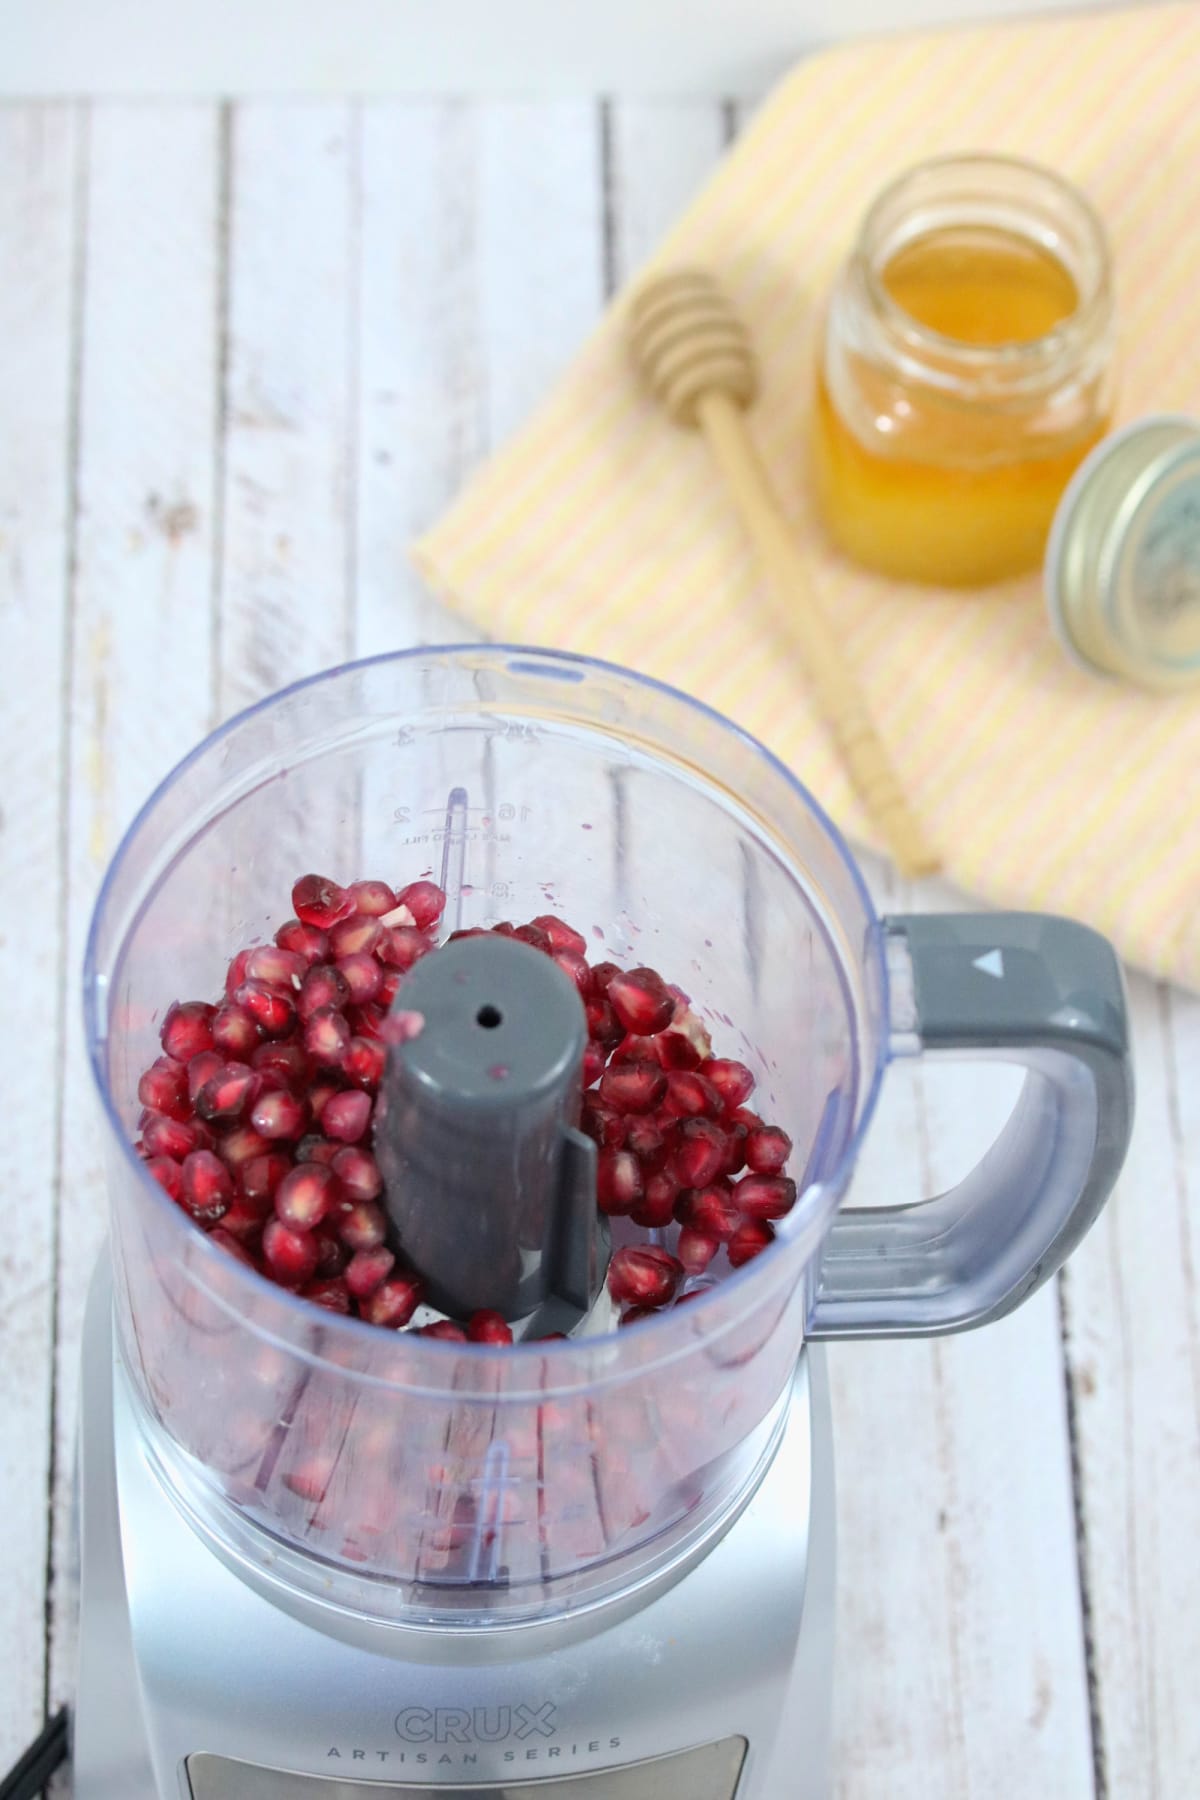 Pomegranate seeds in food processor